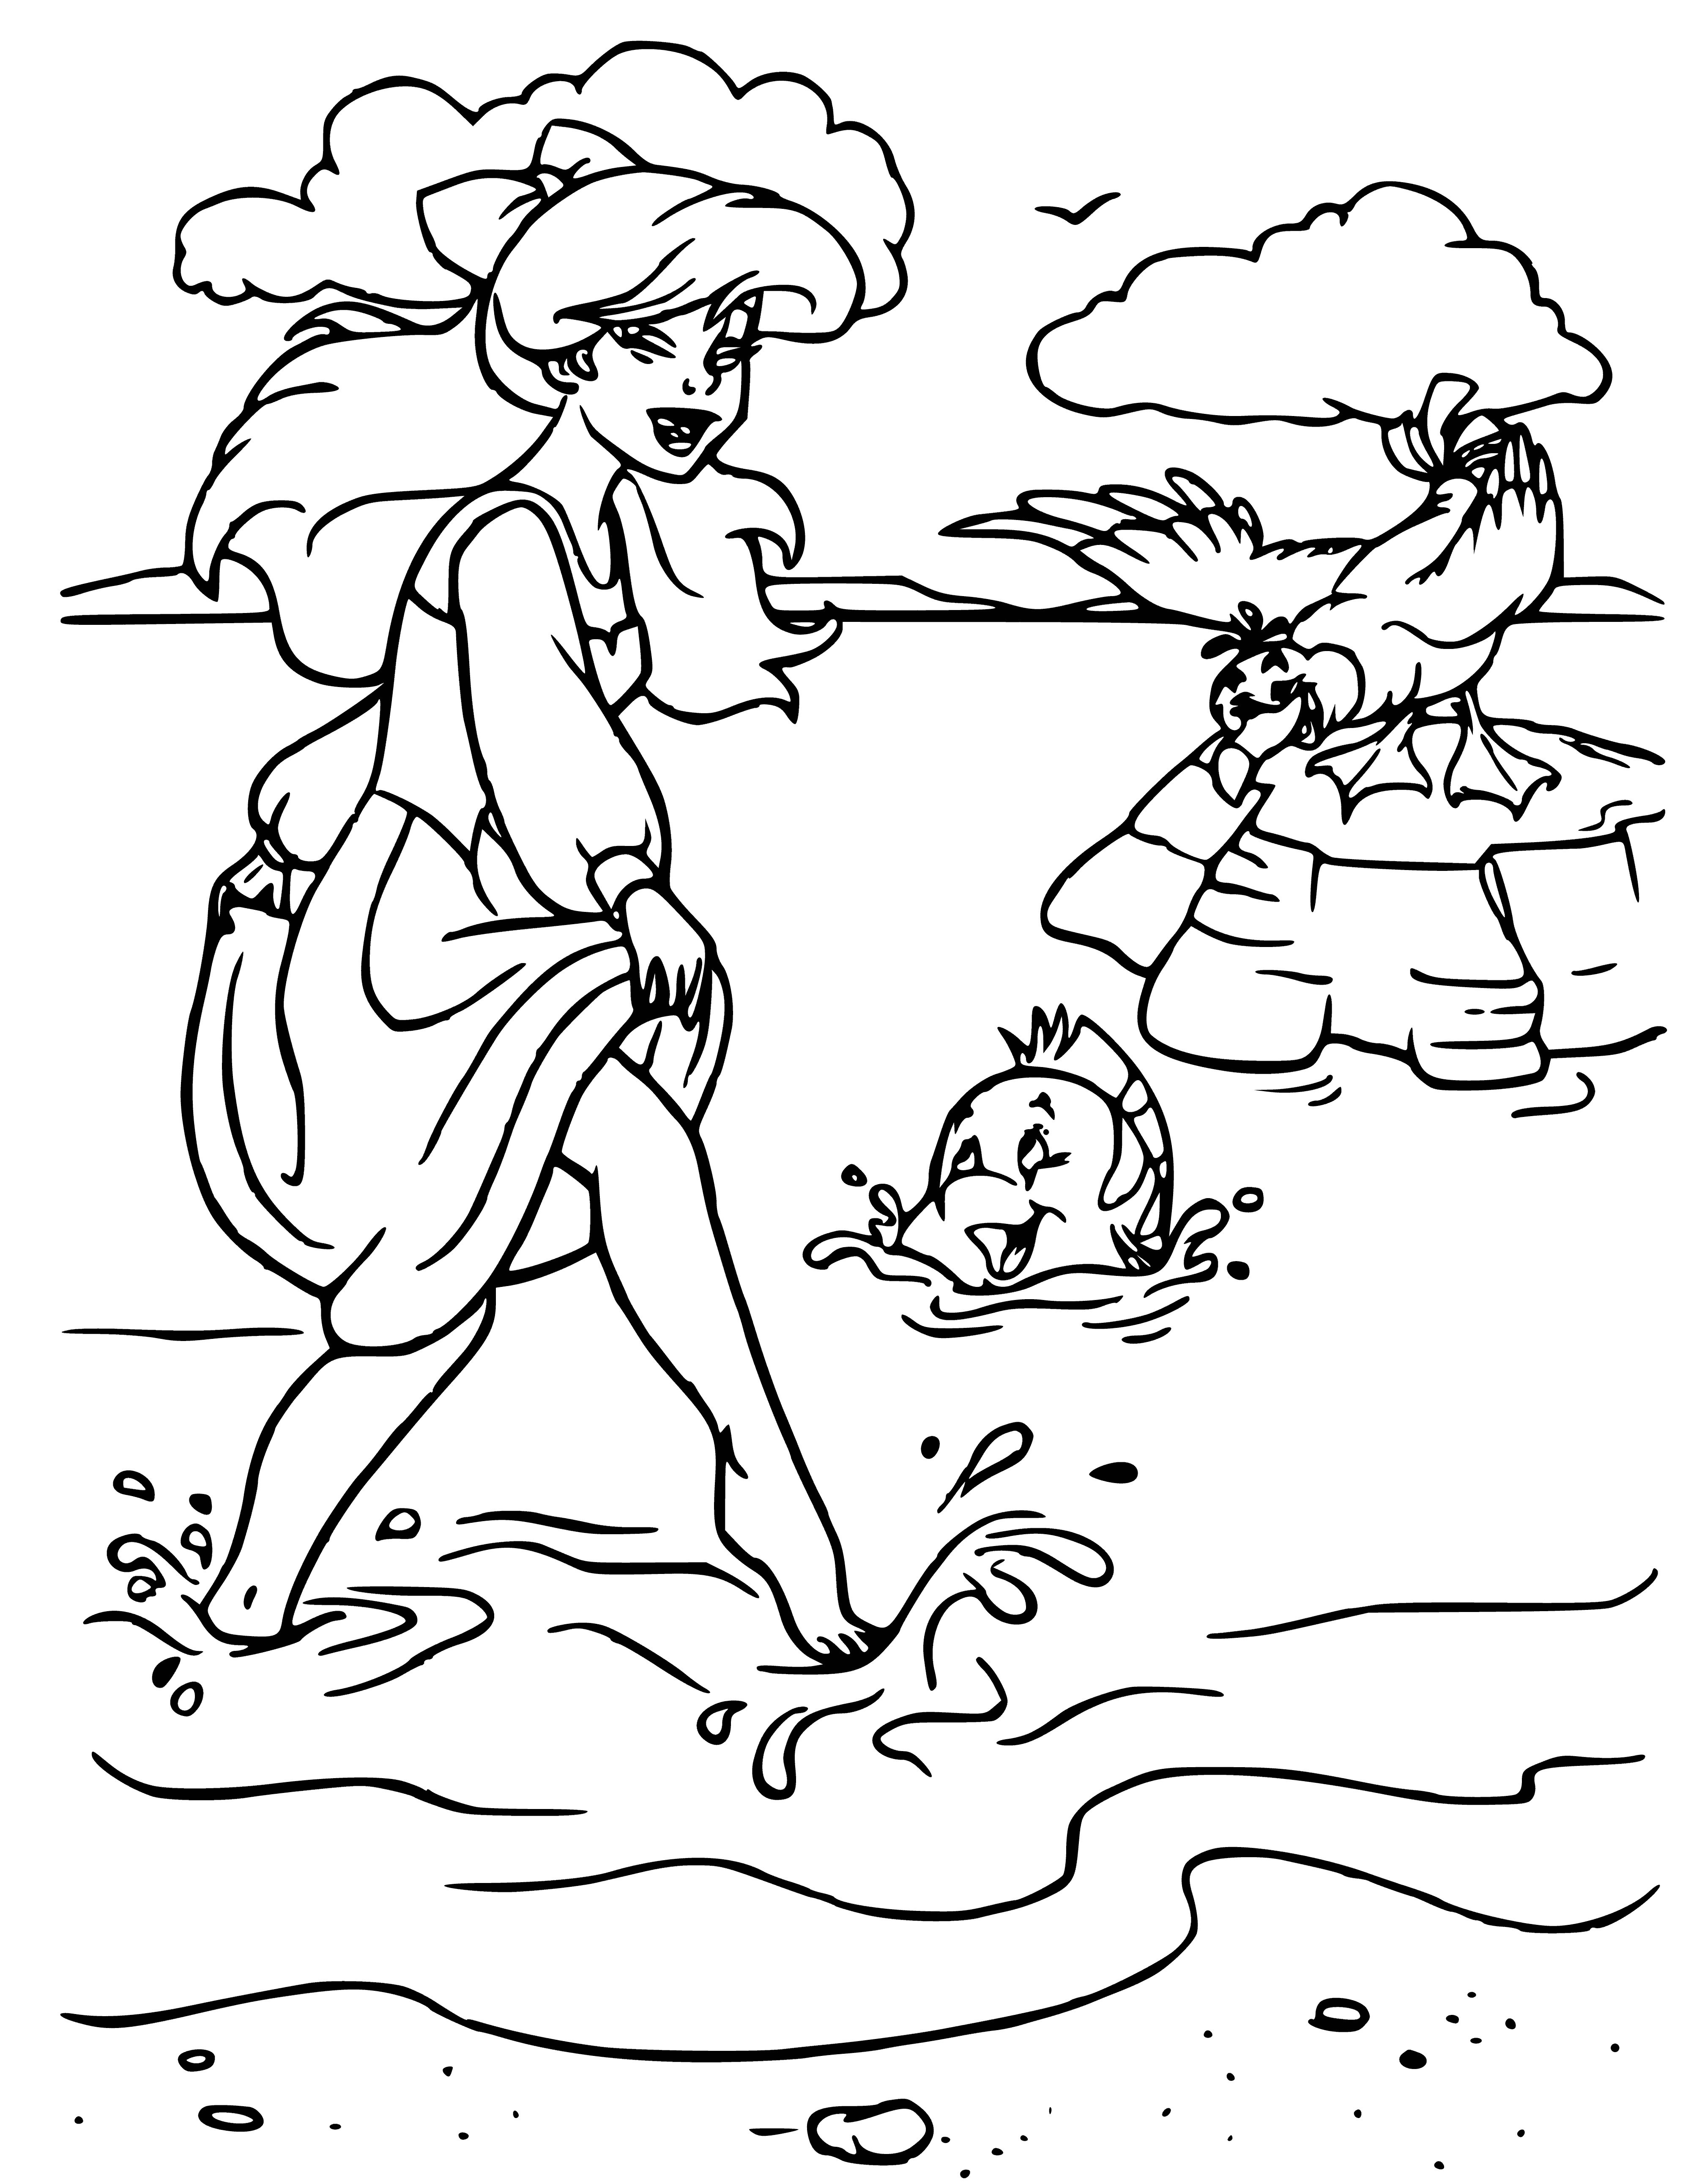 coloring page: A young woman sits by the ocean, exposed legs and small tail, pensive expression with long hair covering breasts. Fish surround her.